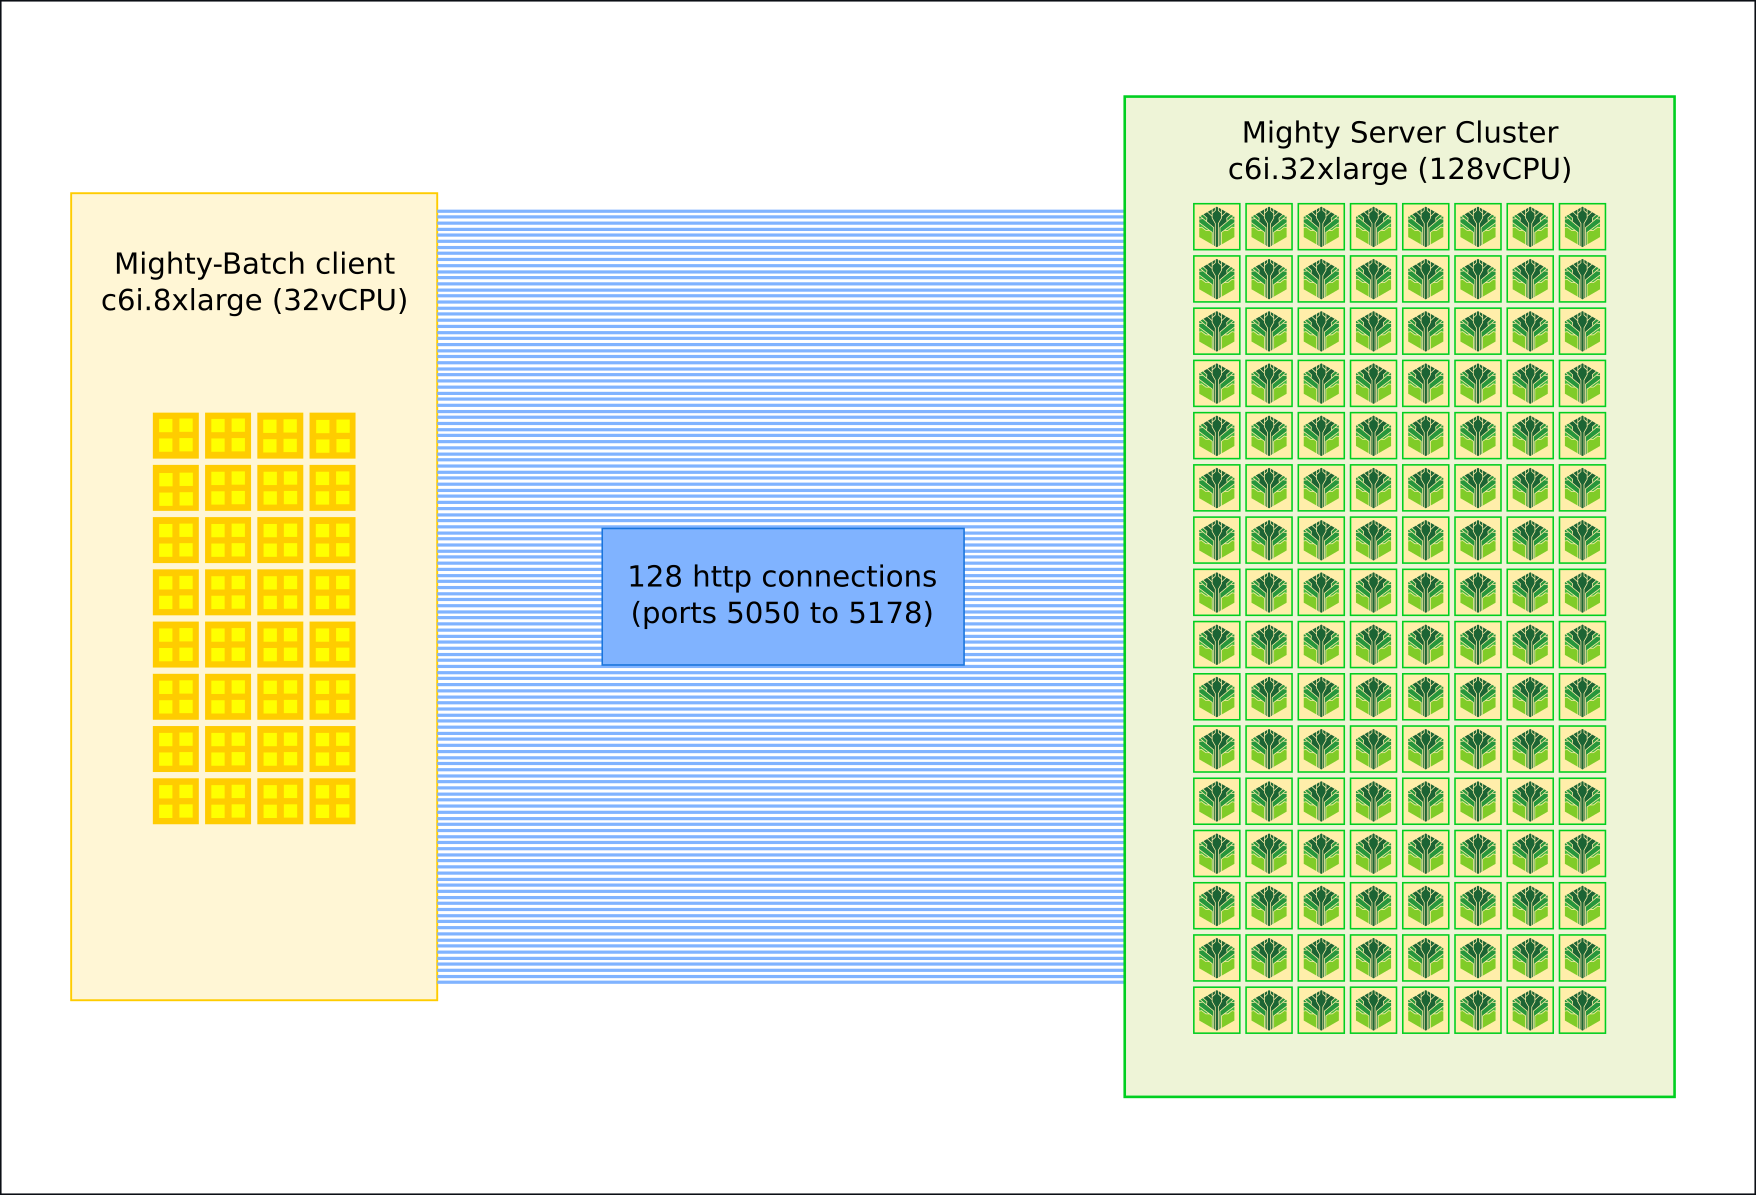 Infrastructure diagram of a 32CPU client making 128 http connections to a 128CPU server hosting Mighty